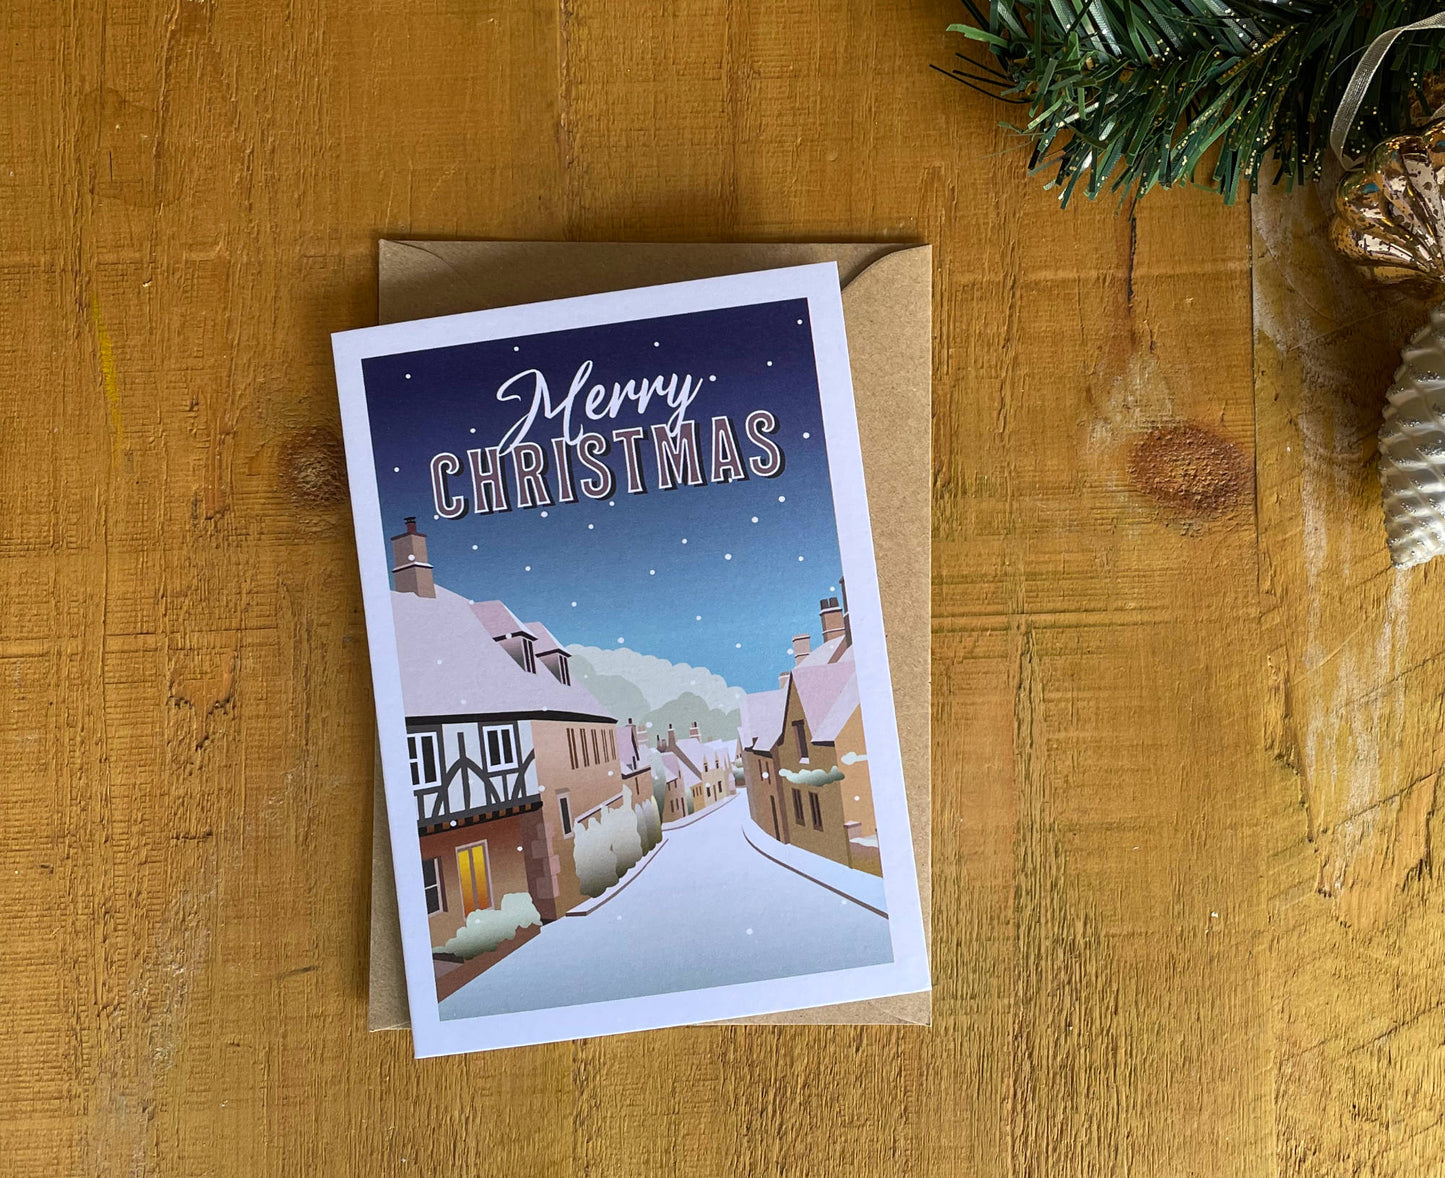 Castle Combe retro Christmas card on table